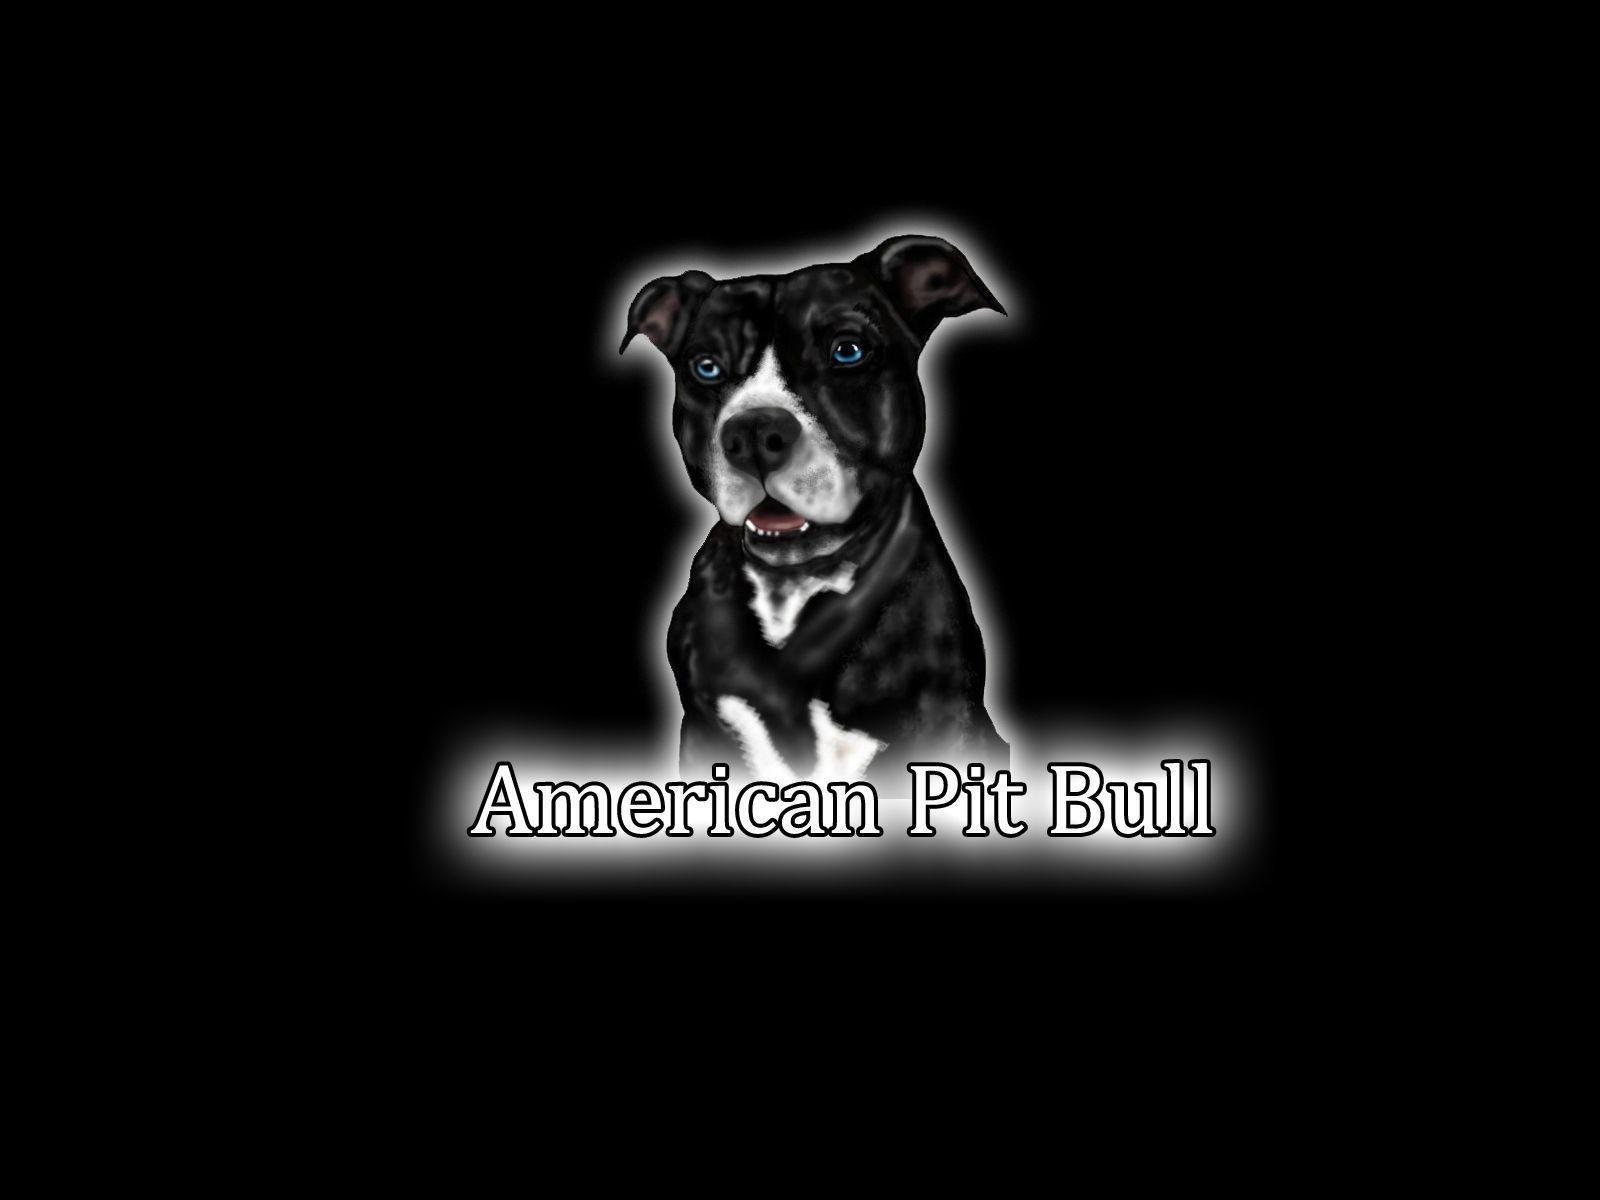 Pit bull Wallpapers